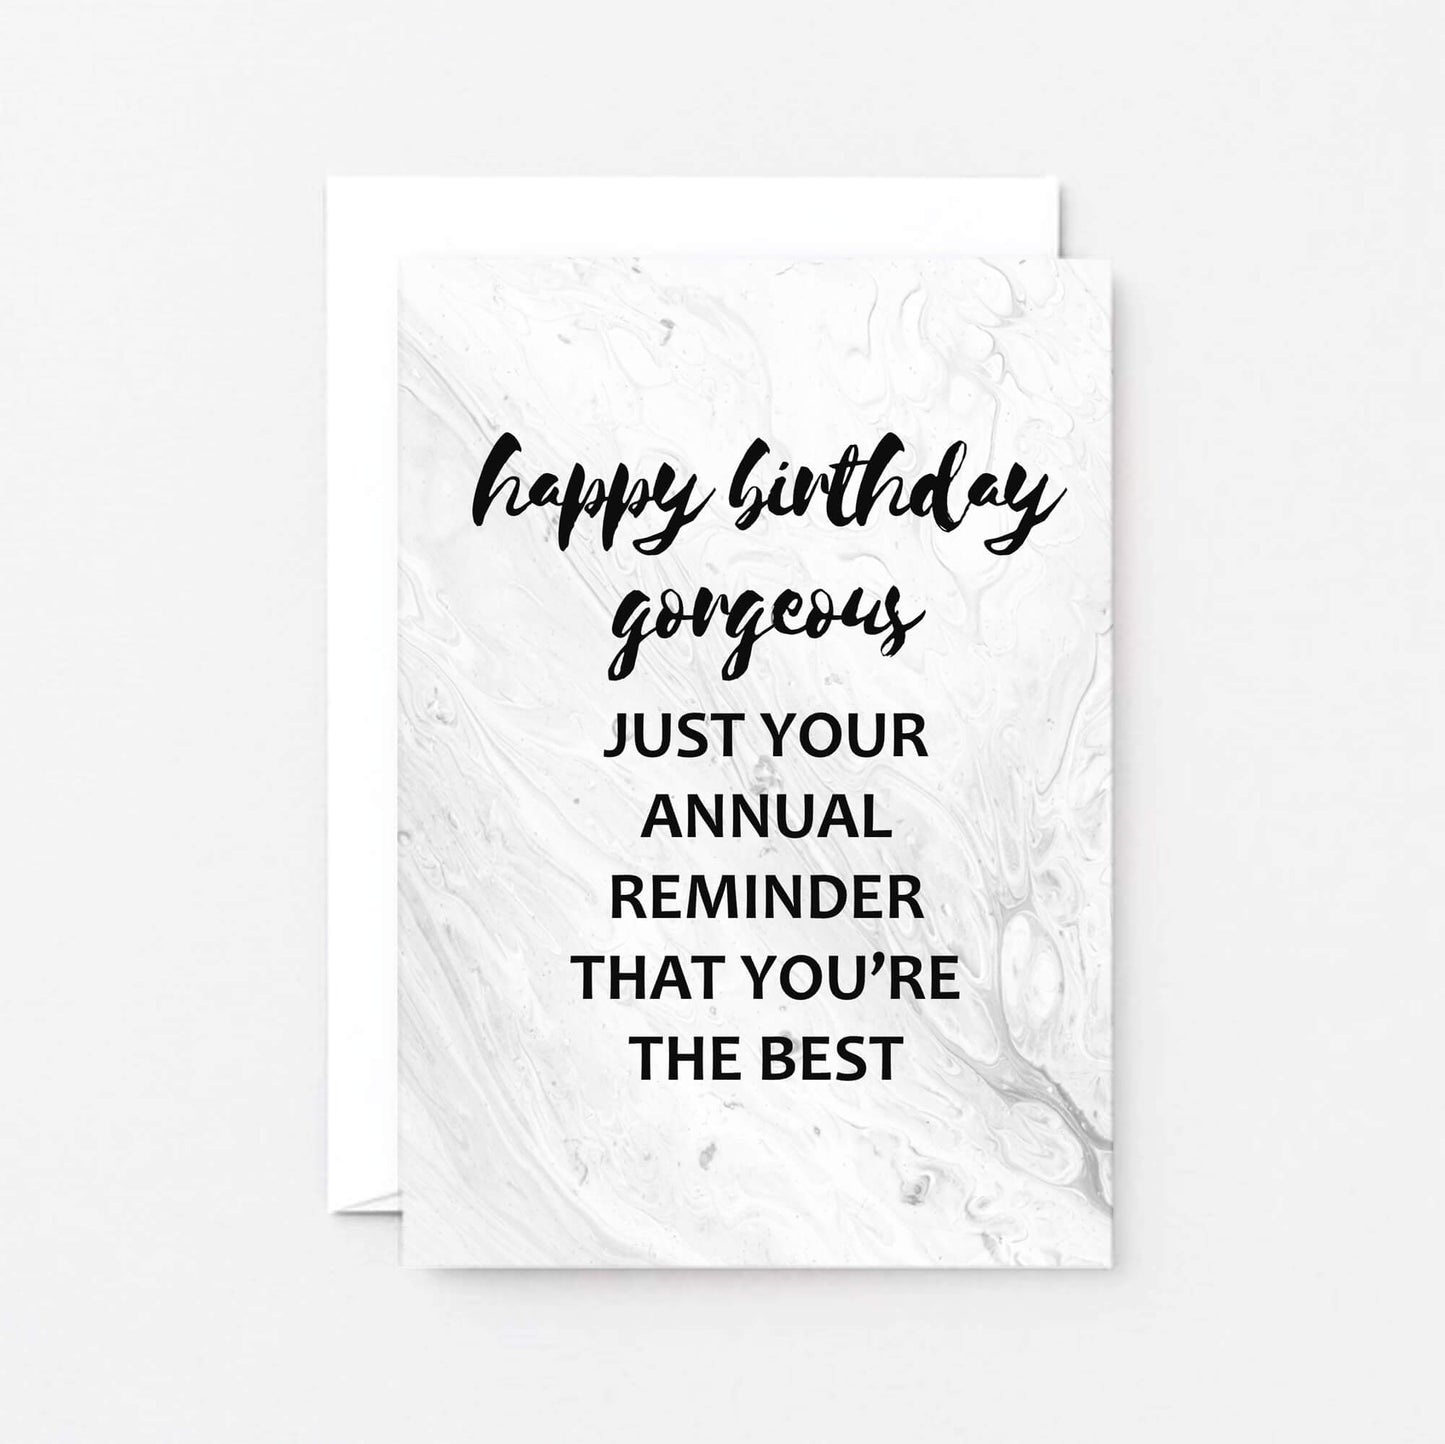 Birthday Card by SixElevenCreations. Reads Happy birthday gorgeous. Just your annual reminder that you're the best. Product Code SE3012A6